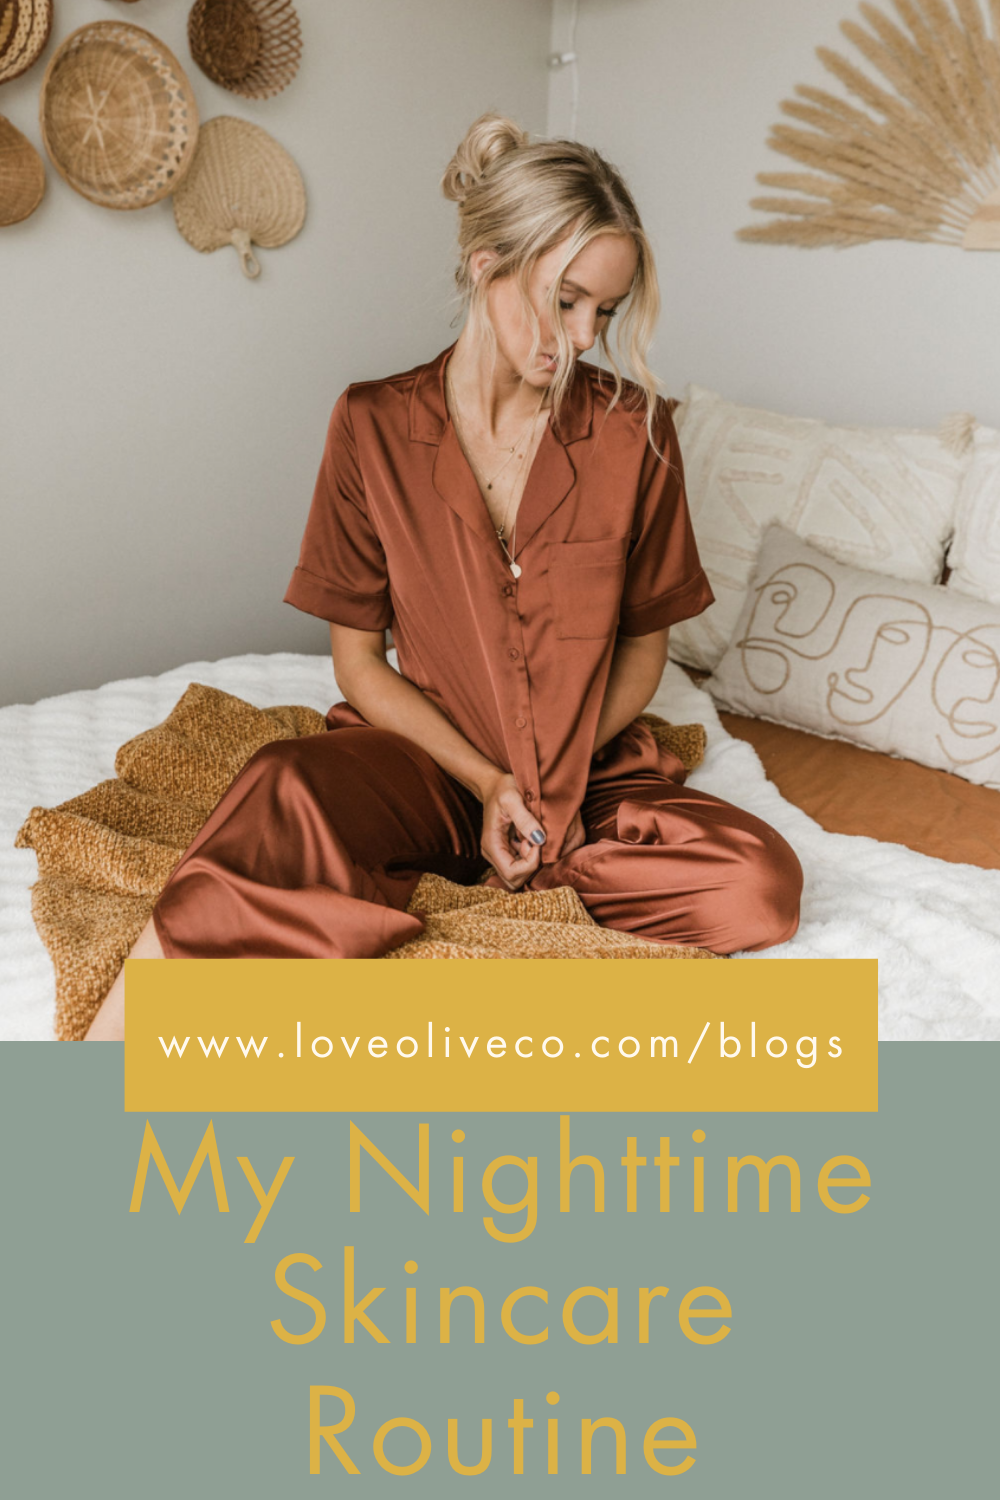 My Nighttime Skincare Routine www.loveoliveco.com